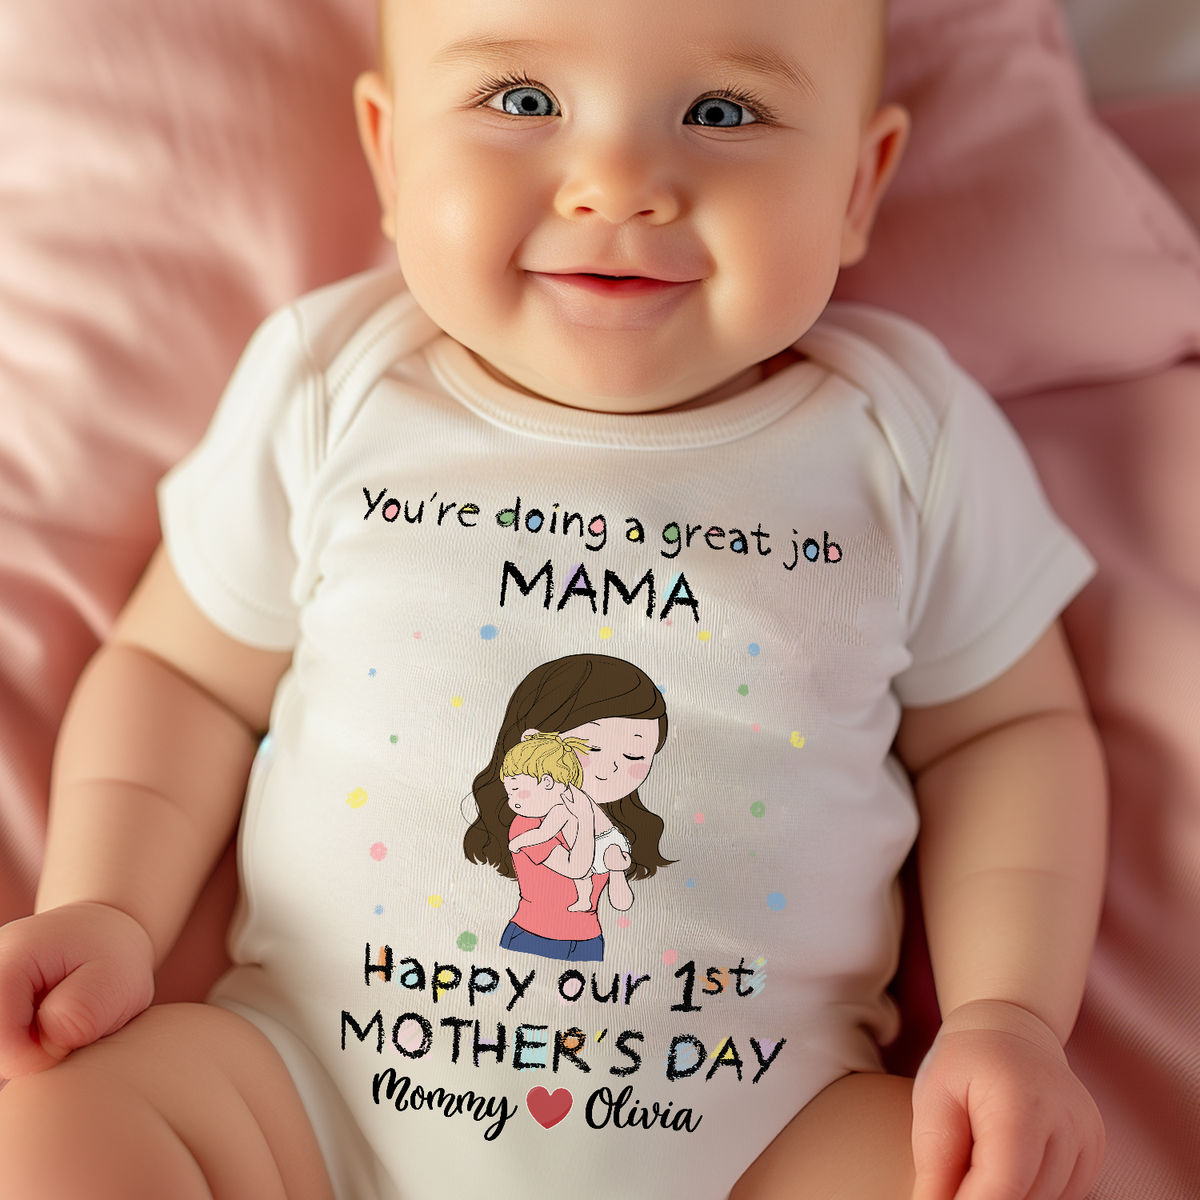 Personalized Shirt - Mother's Day Gift - You're doing a Great Job Mama - Happy Our 1st Mother's Day